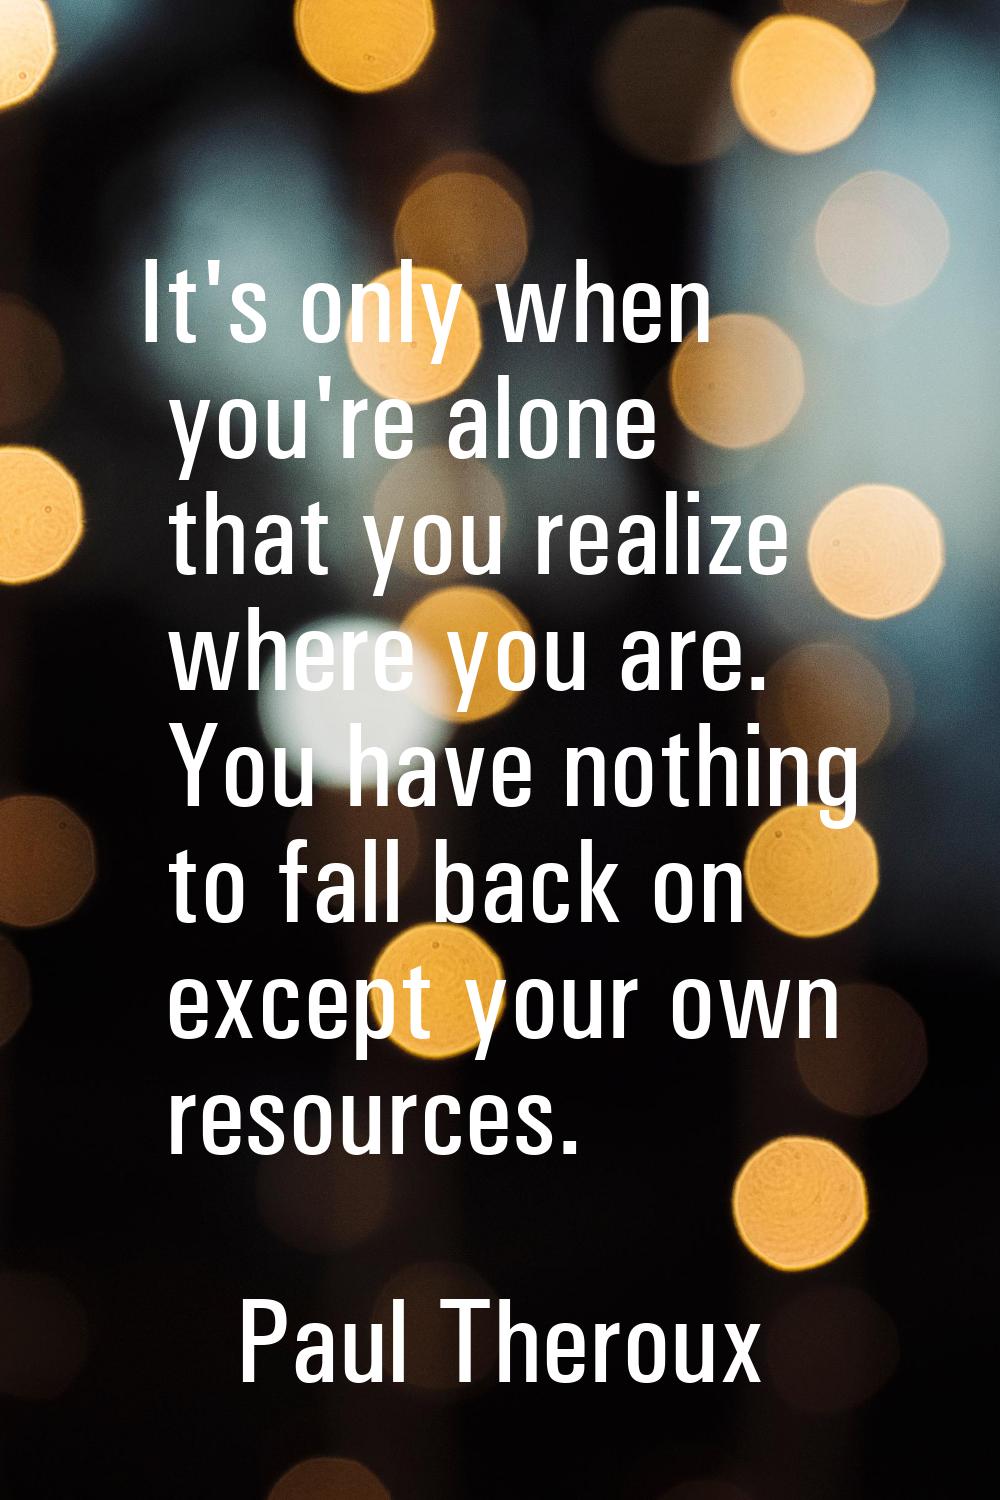 It's only when you're alone that you realize where you are. You have nothing to fall back on except